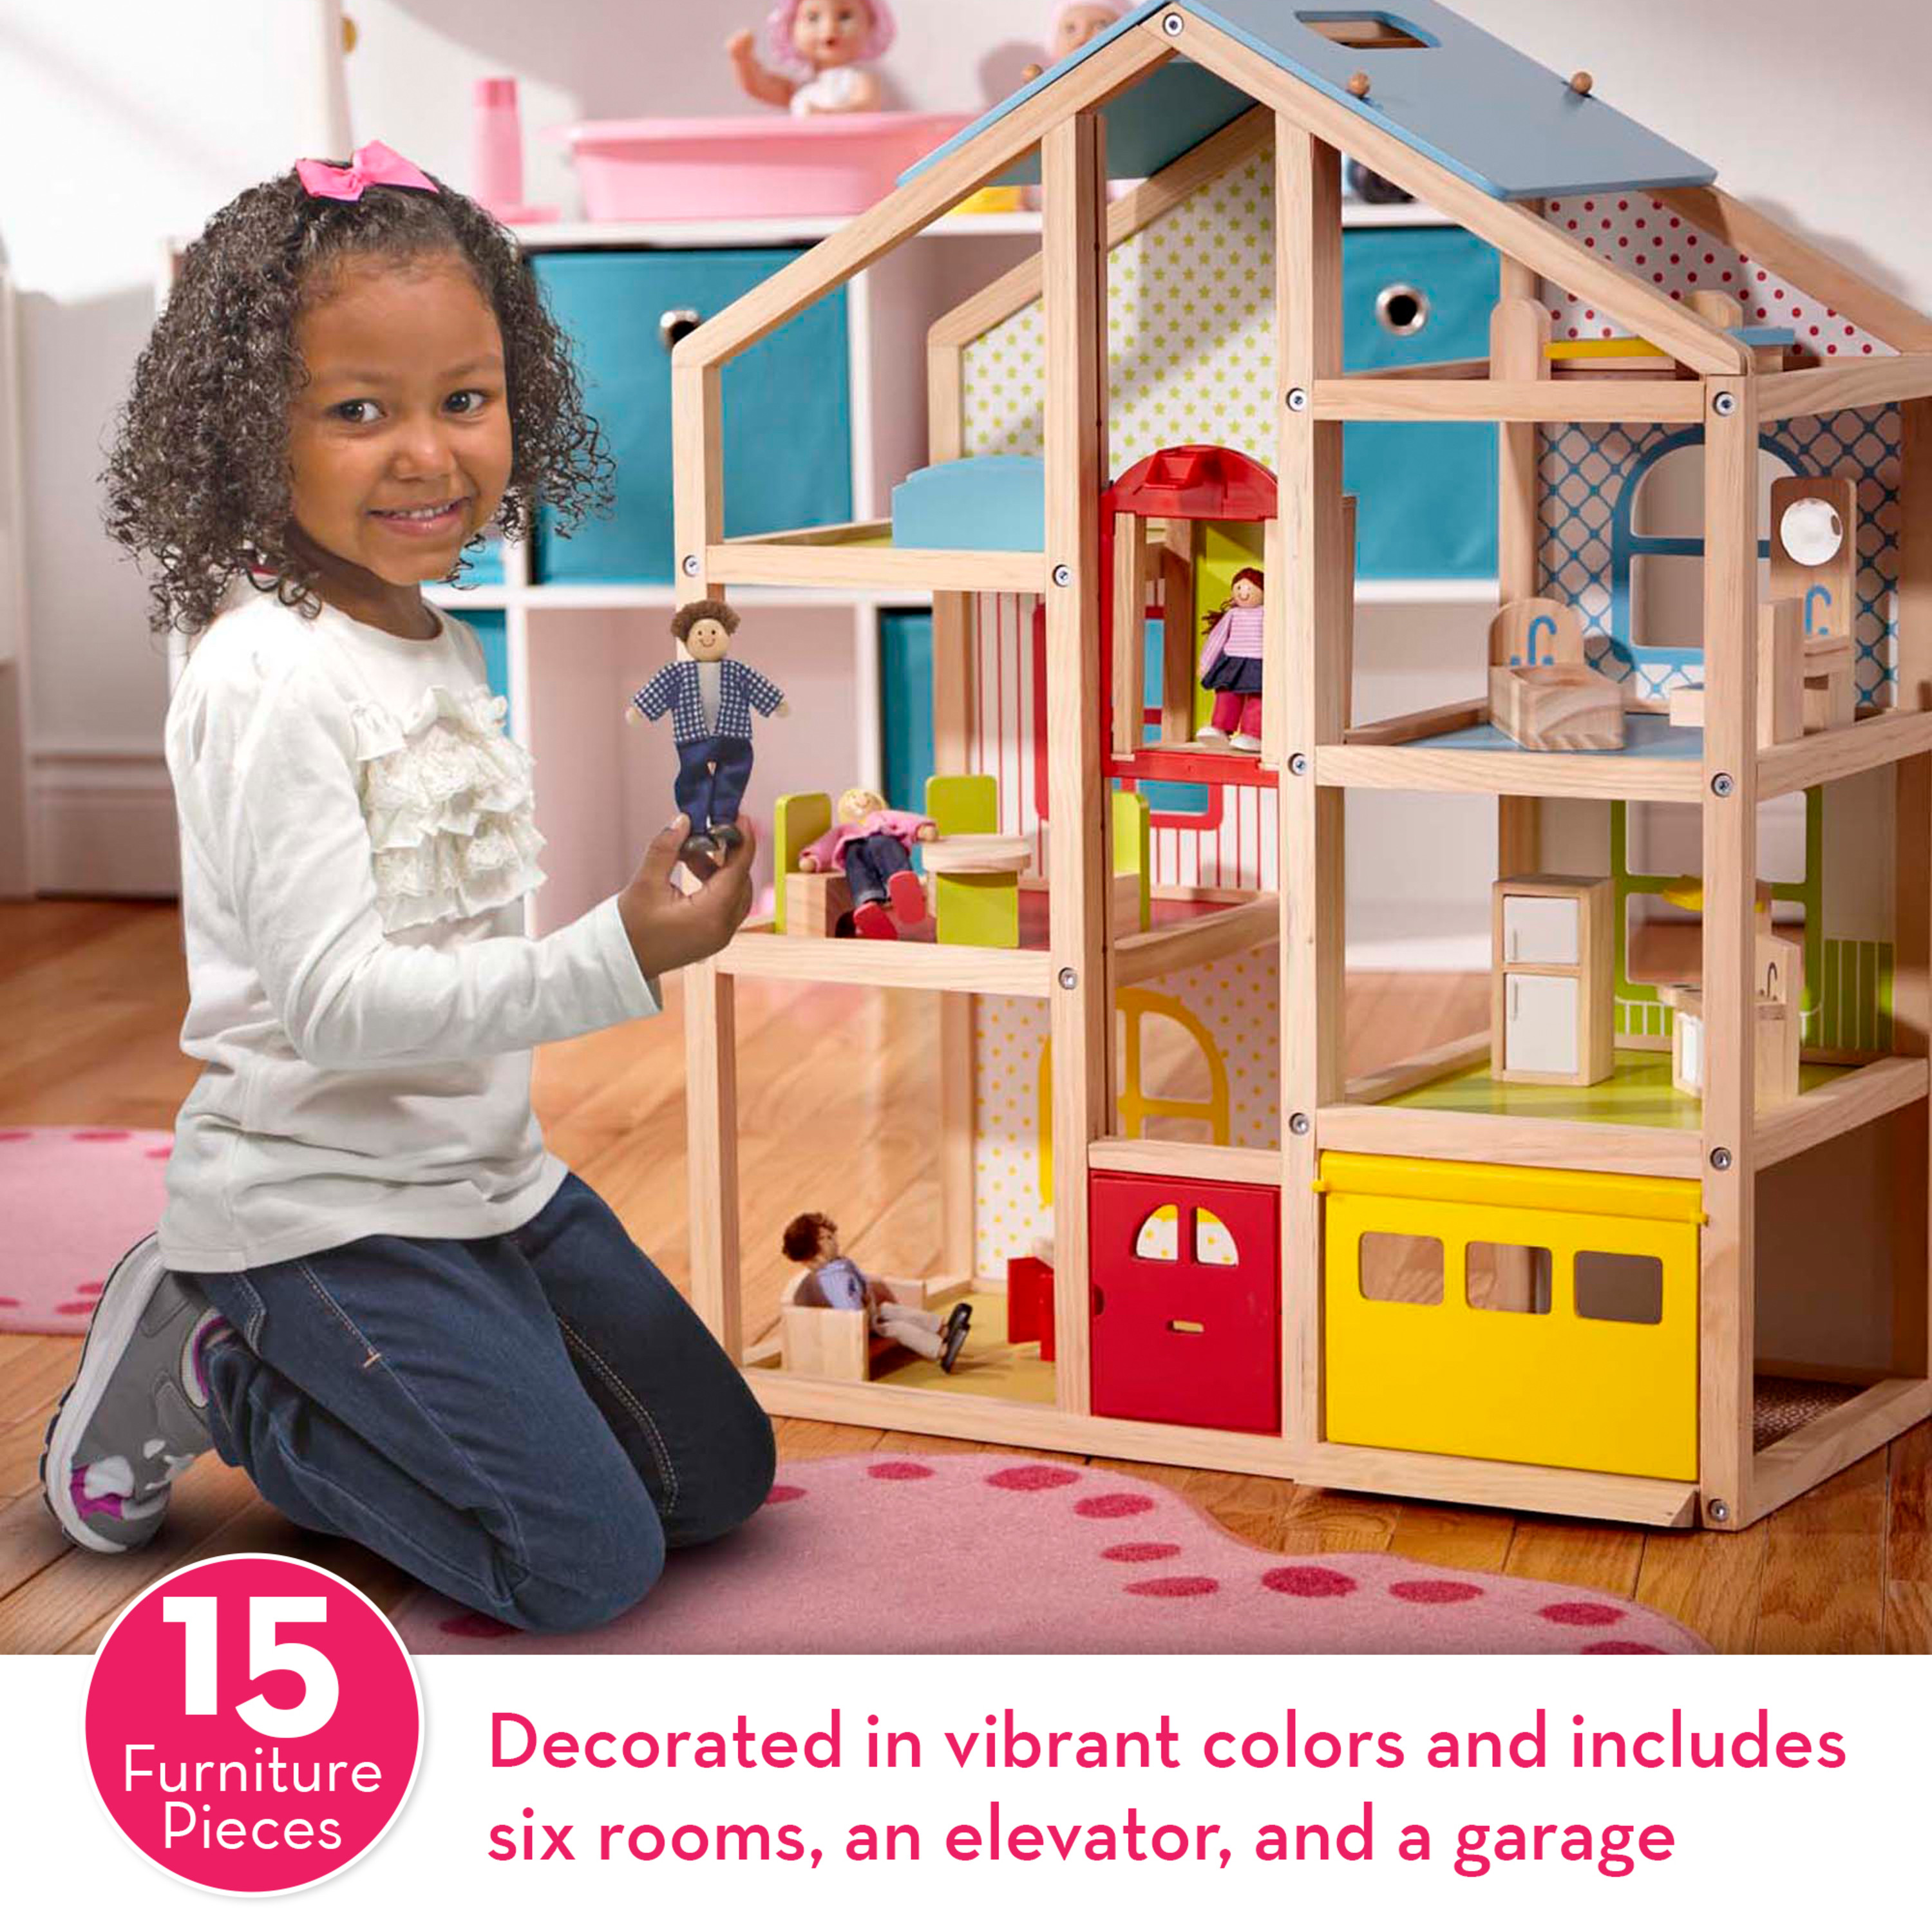 Melissa & Doug Wooden Hi-Rise Dollhouse With 15 Furniture Pieces, Garage, Working Elevator - image 3 of 10